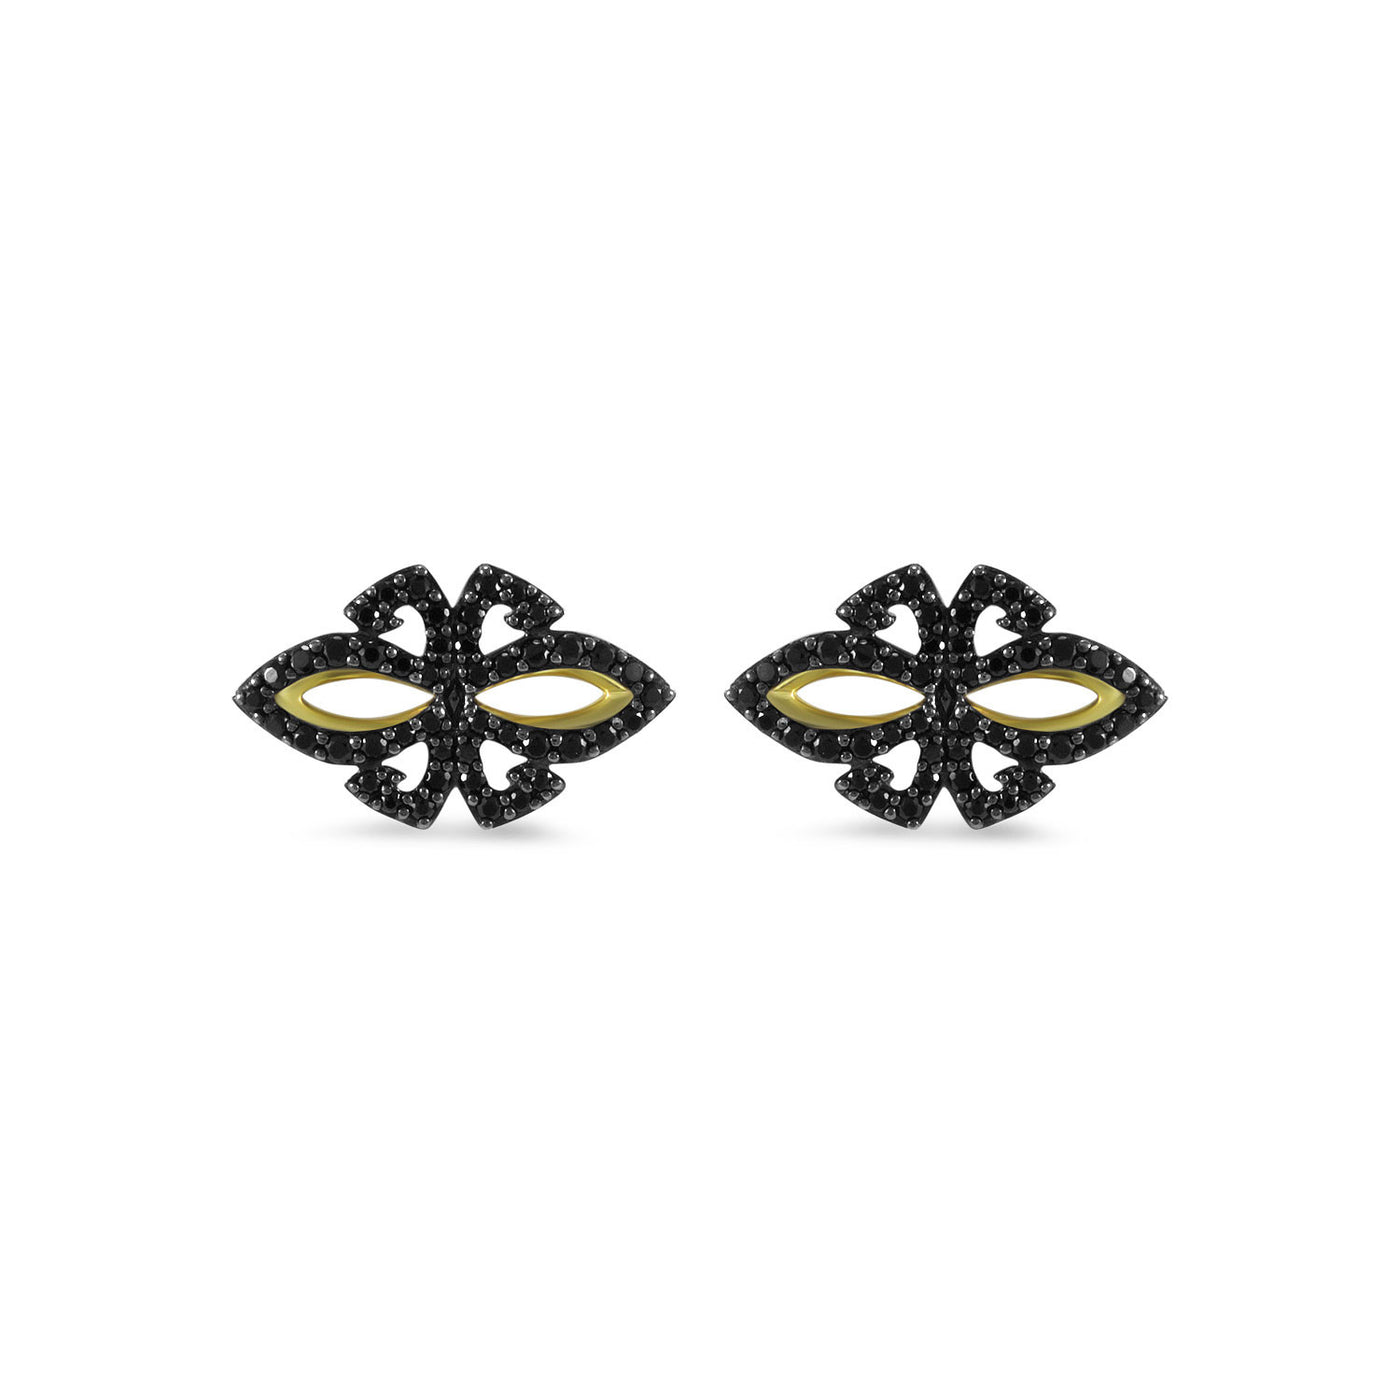 Pave Stud earring